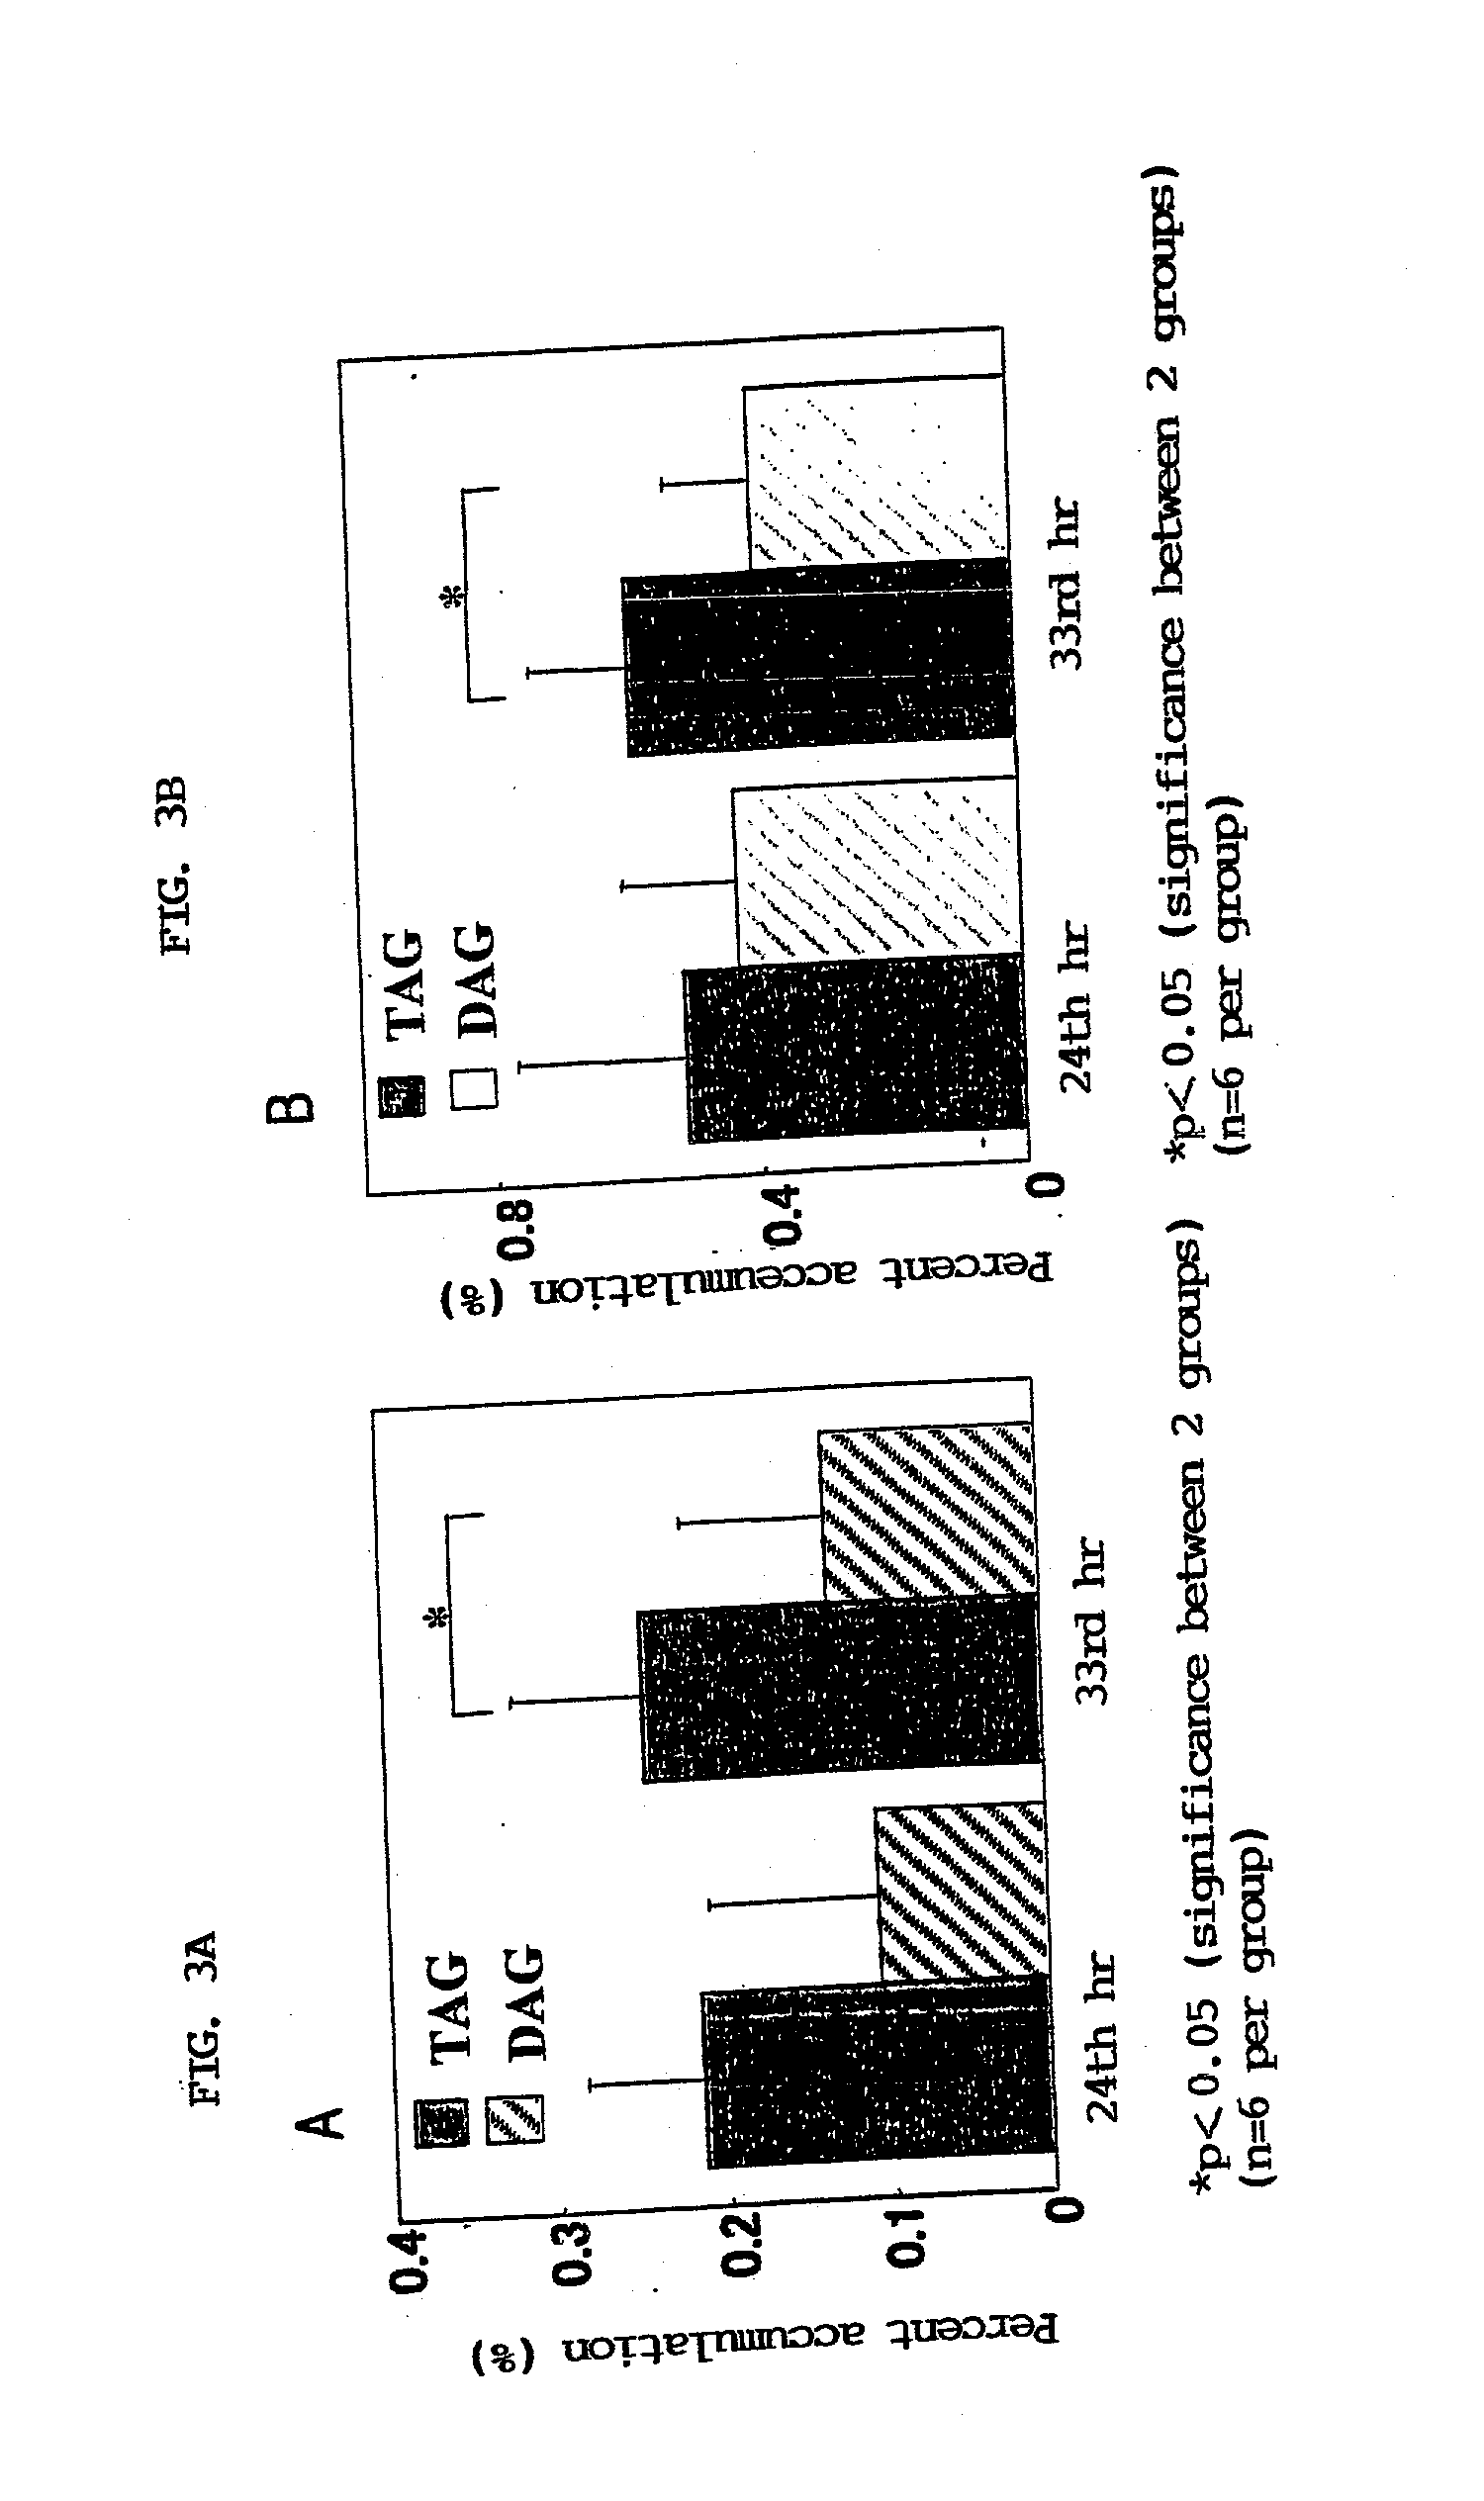 Method for activating the lipid catabolic metabolism in enteric epithelium and improving the lipid metabolism in enteric epithelium